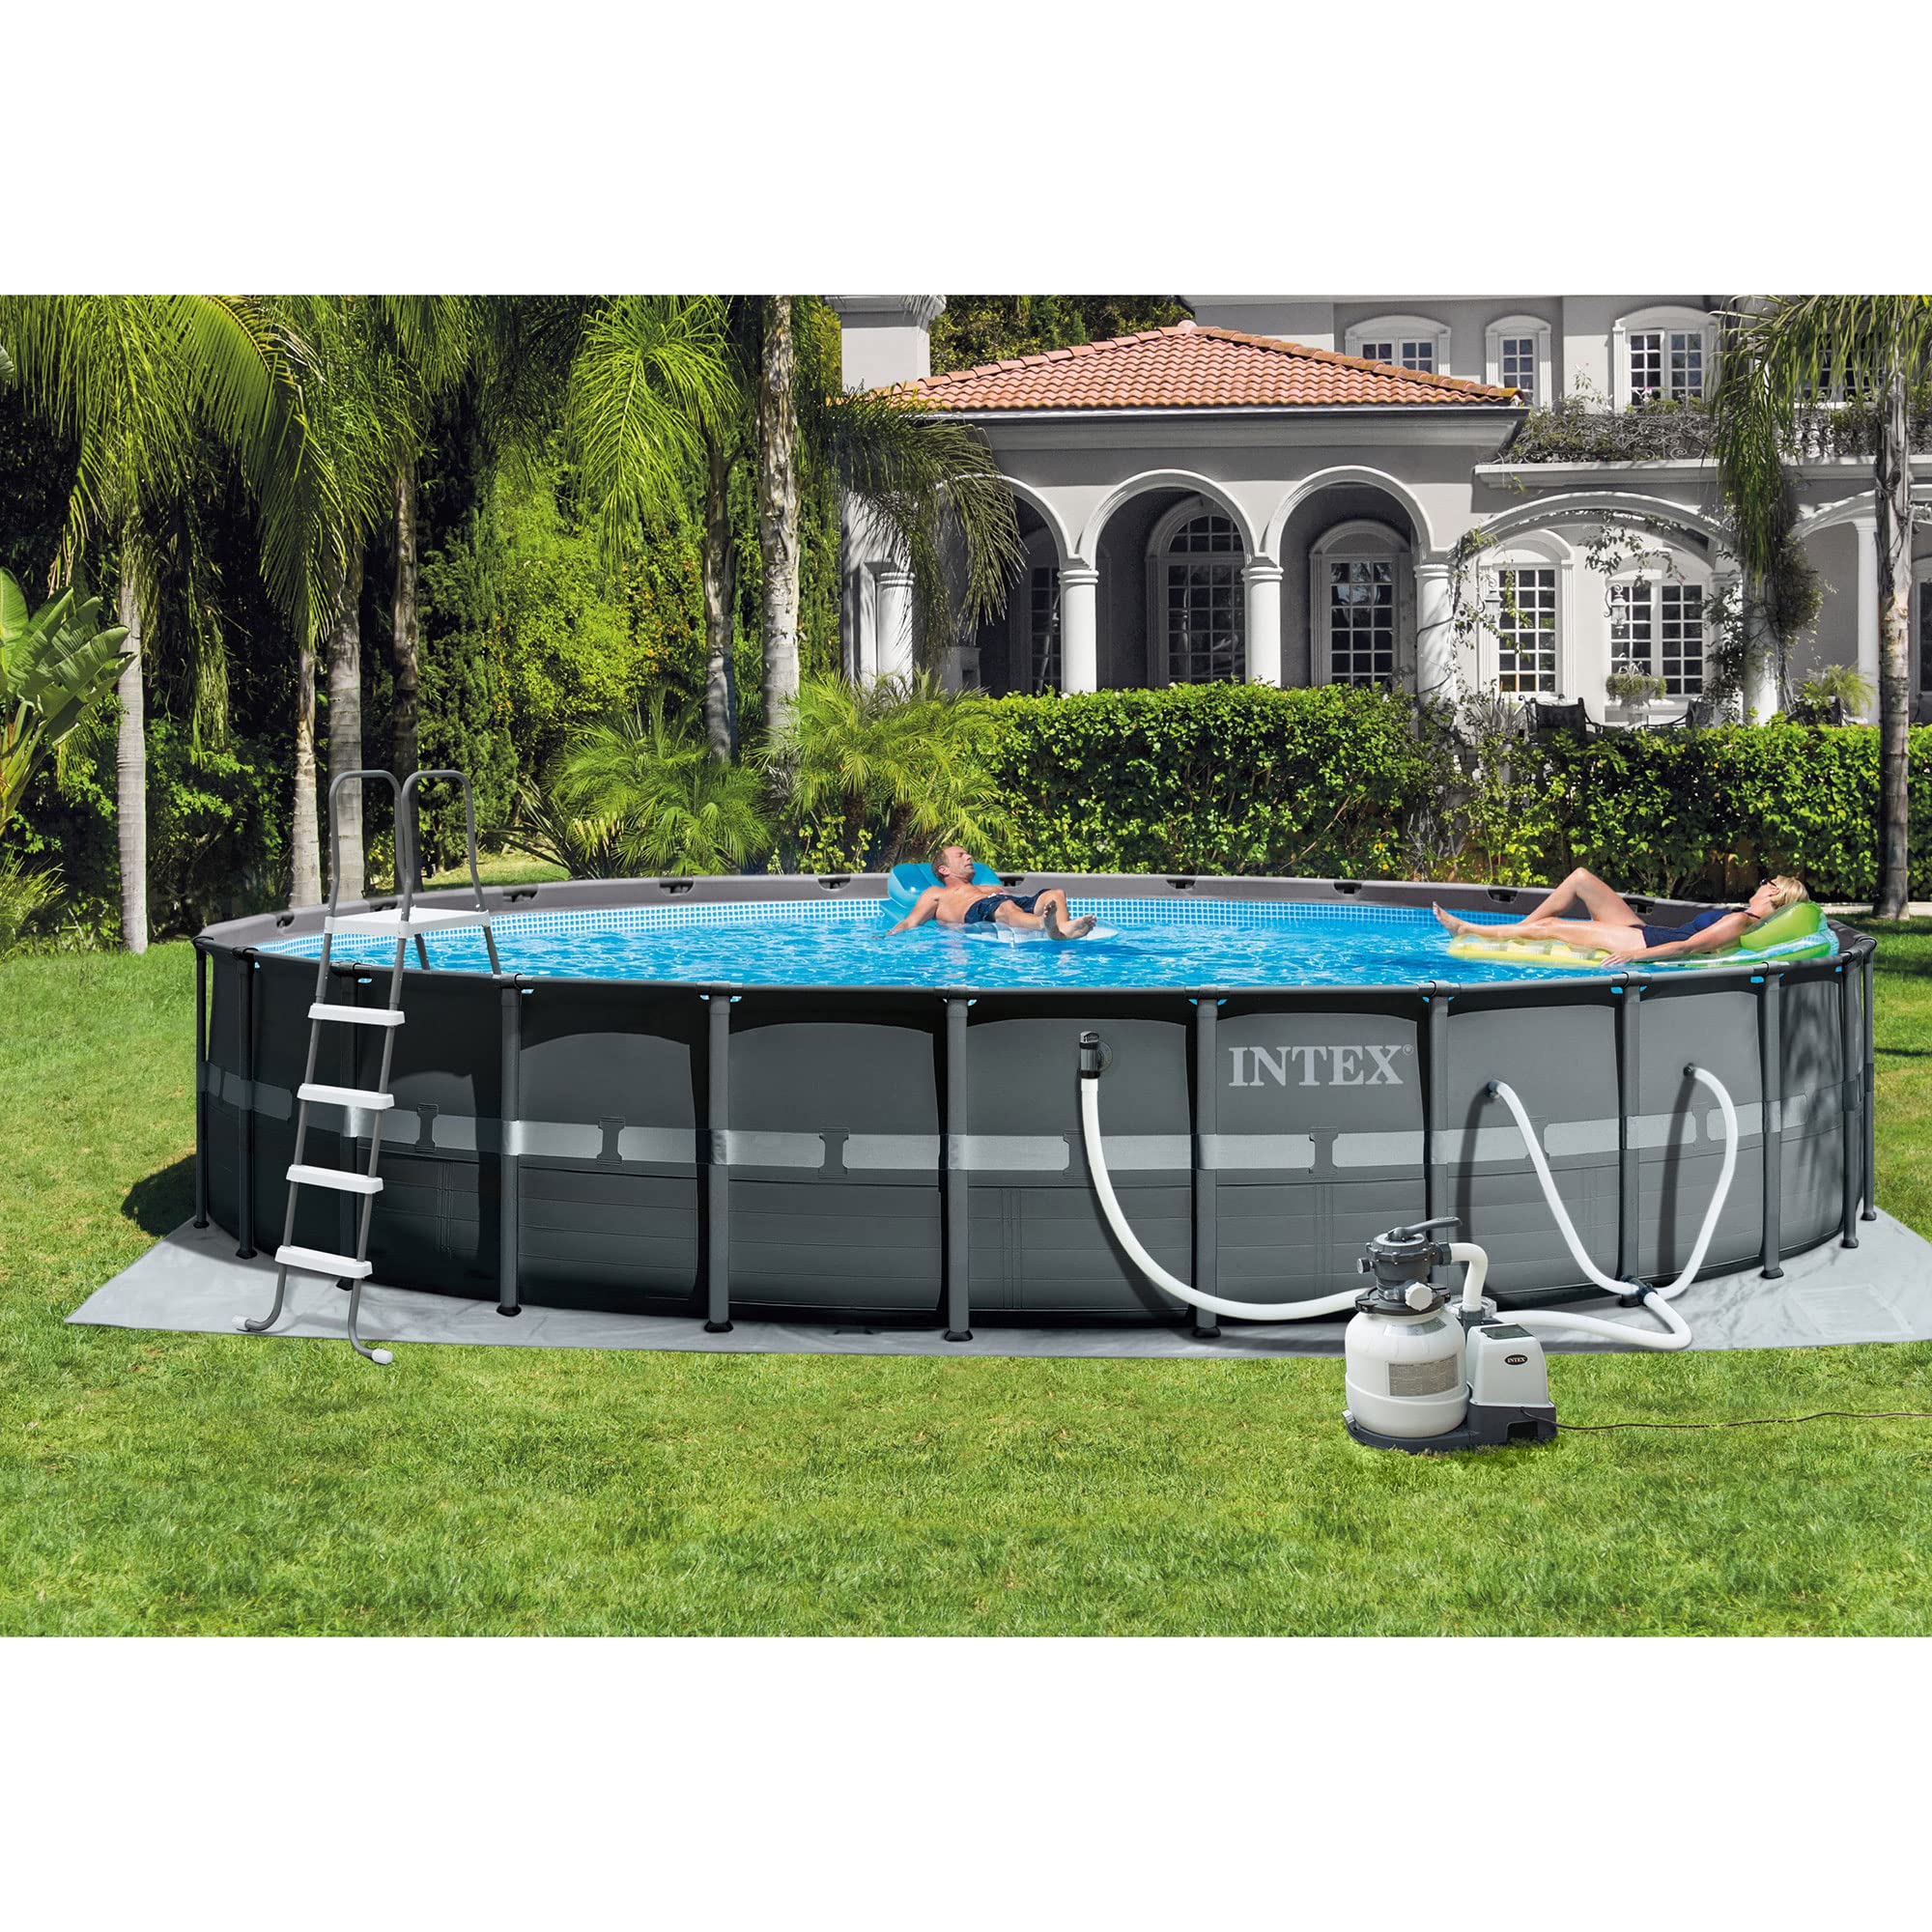 Intex Ultra Frame 26' x 52" Round Above Ground Outdoor Swimming Pool Set with 2100 GPH Sand Filter Pump, Ground Cloth, Ladder, and Pool Cover